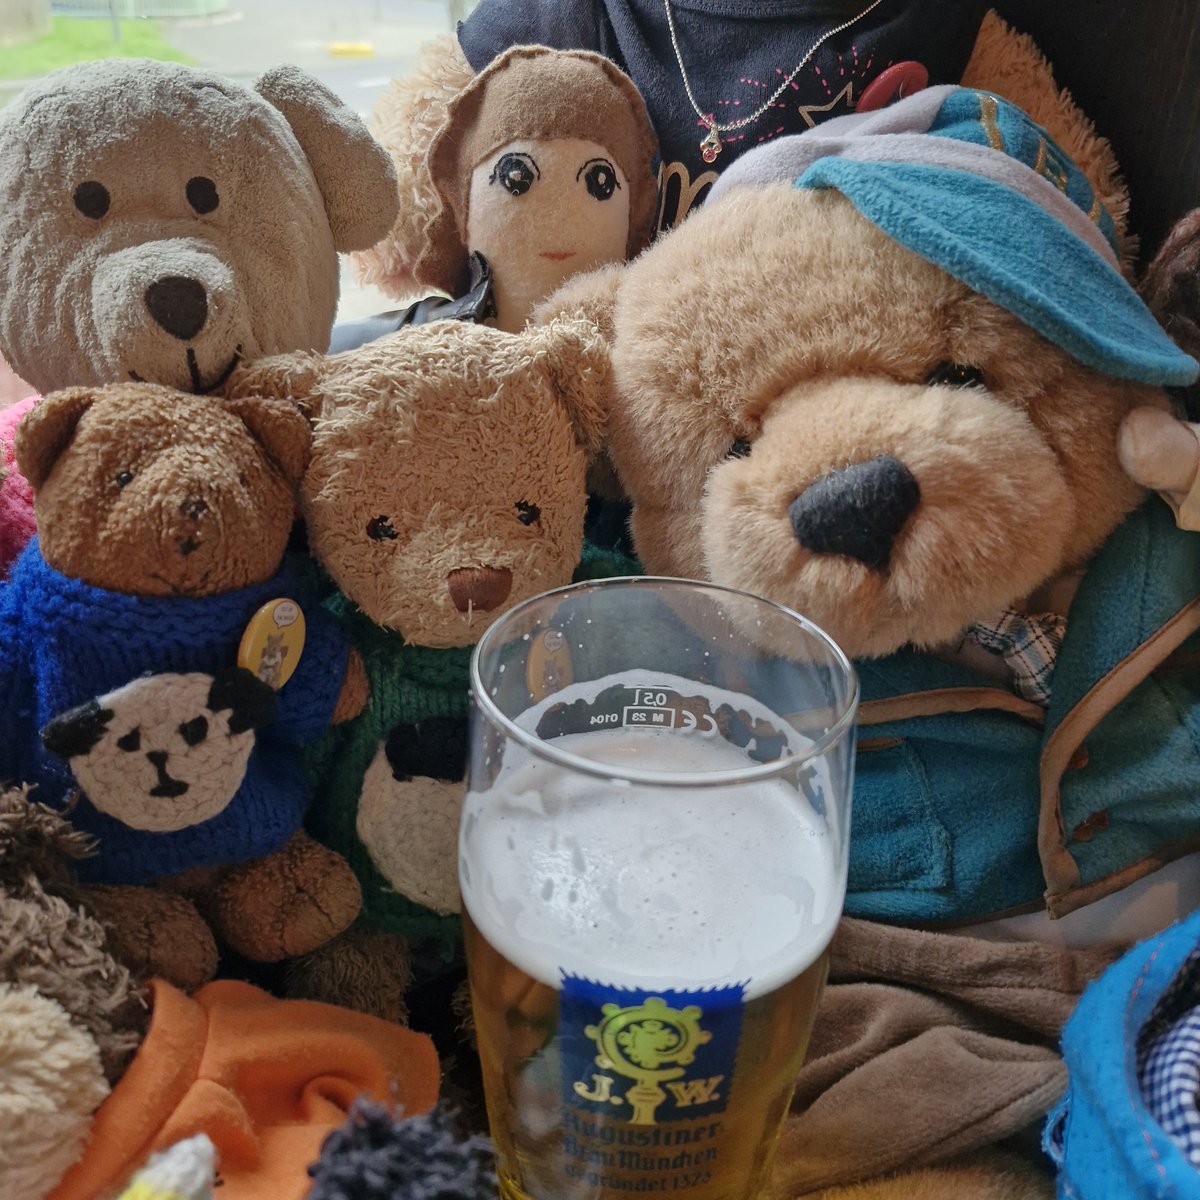 I went out for a beer in Cologne and would you believe it, that young Wrigglesworth cub showed up! If he continues trying to drink my beer I may have to call @Emergency_Teds 🤣 🐾 🇩🇪 🍻 #smallbearsneedbeer